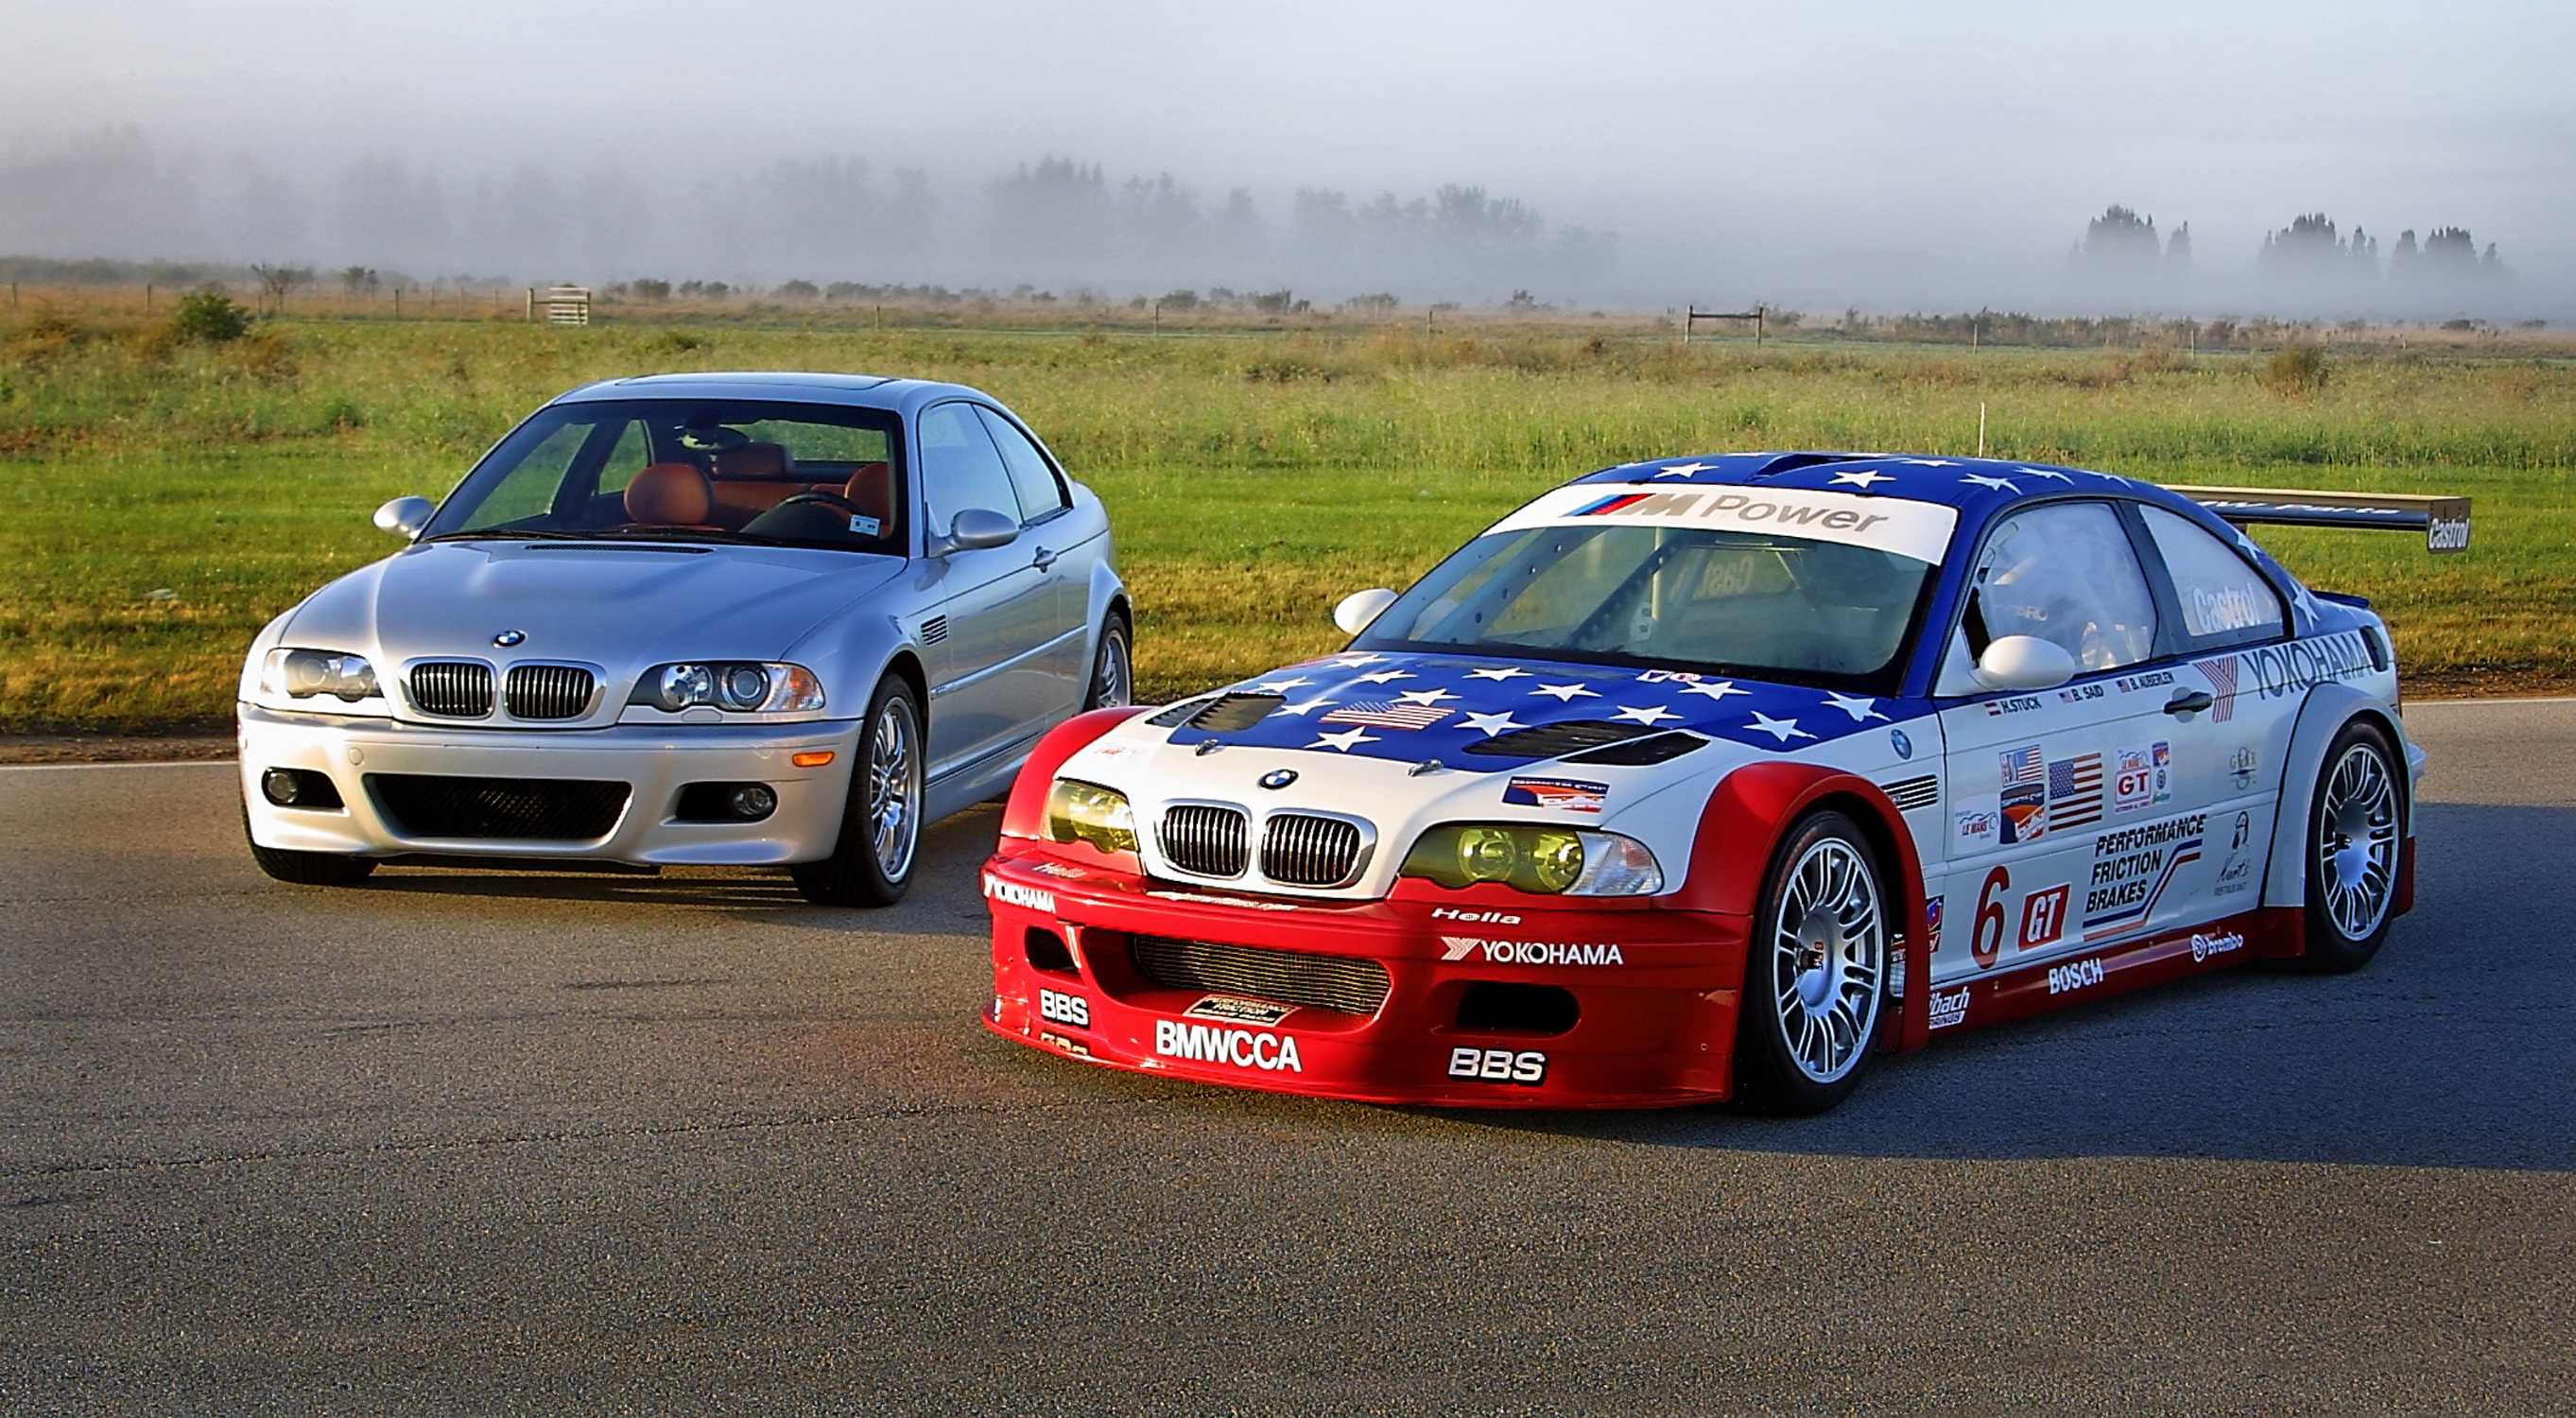 Two 2001 M3 GTR models, one decorated and one not